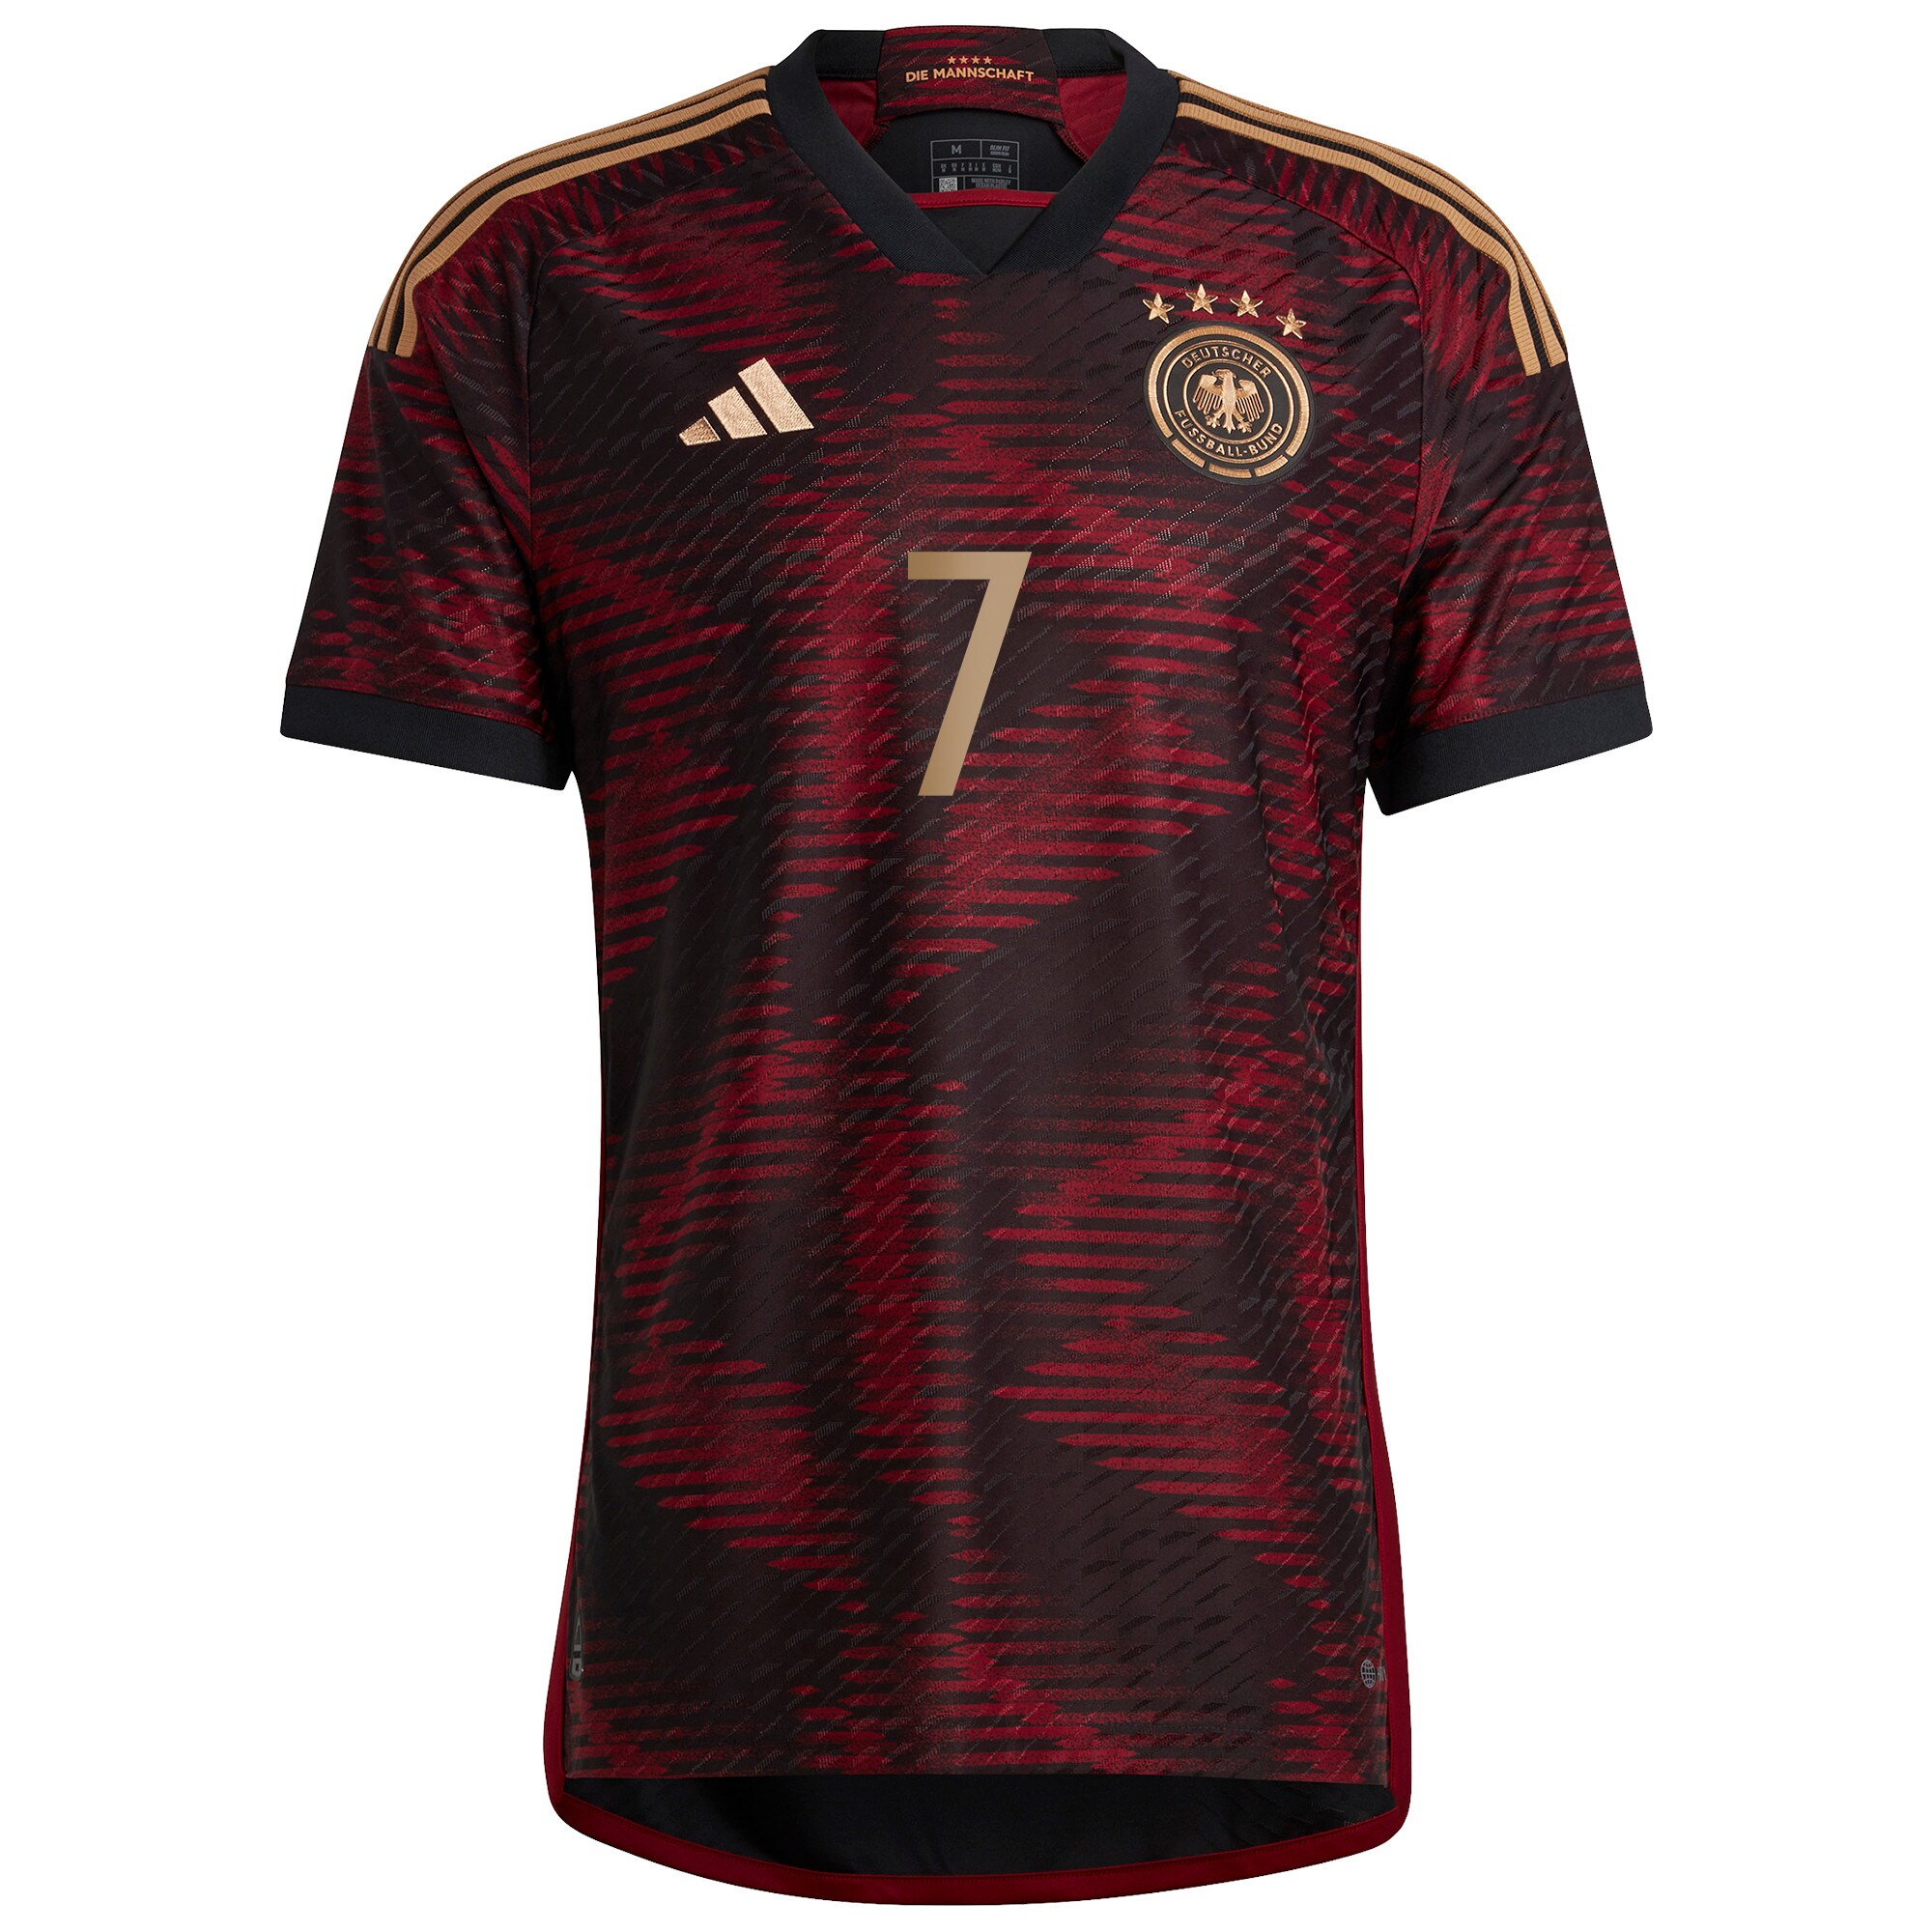 Germany Away Authentic Shirt with Havertz 7 printing